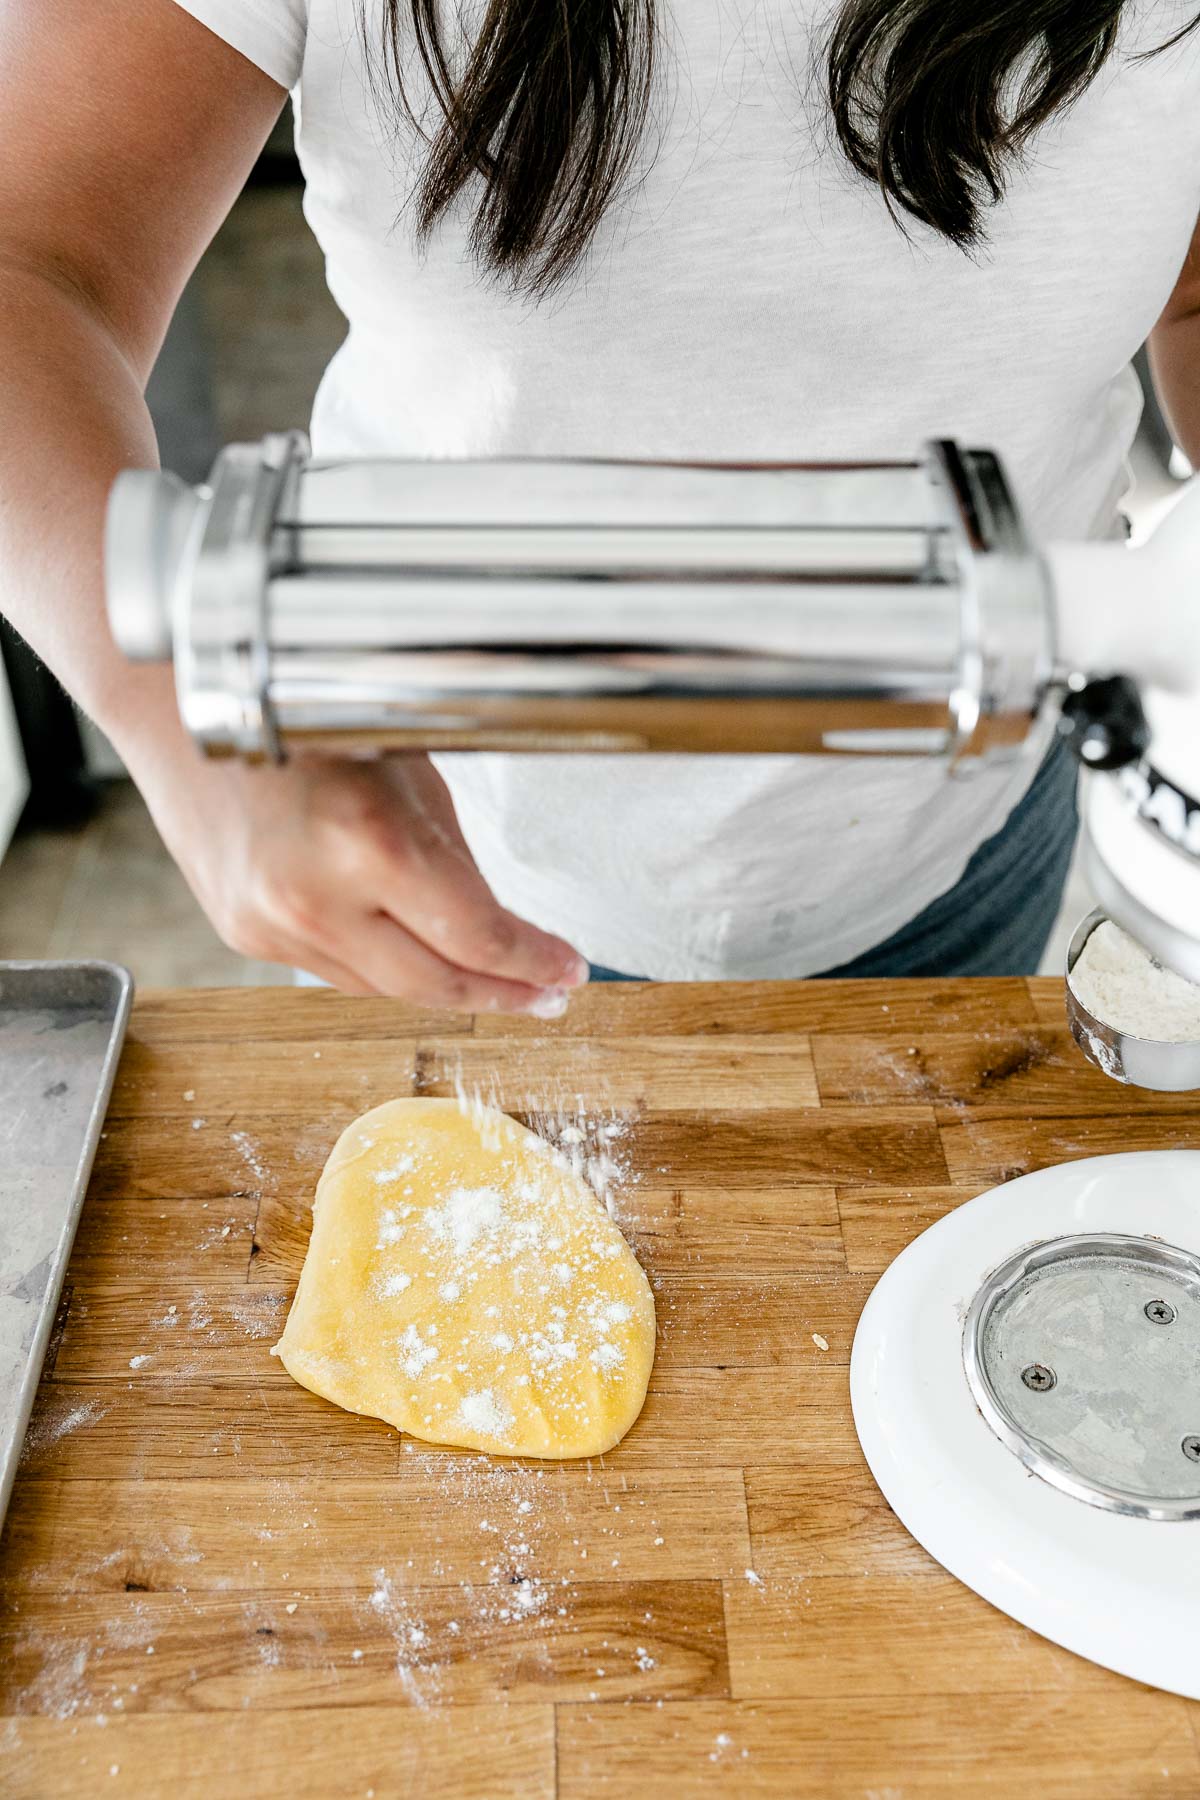 Jess of Plays Well With Butter uses her hands to lightly dust a piece of homemade pasta dough that has been pressed into a thin and even layer and rests atop a butcher block countertop. ​A KitchenAid Stand Mixer with a pasta rolling attachment is set up to be used to roll out the pasta dough and an aluminum baking sheet also sits on top of the countertop.